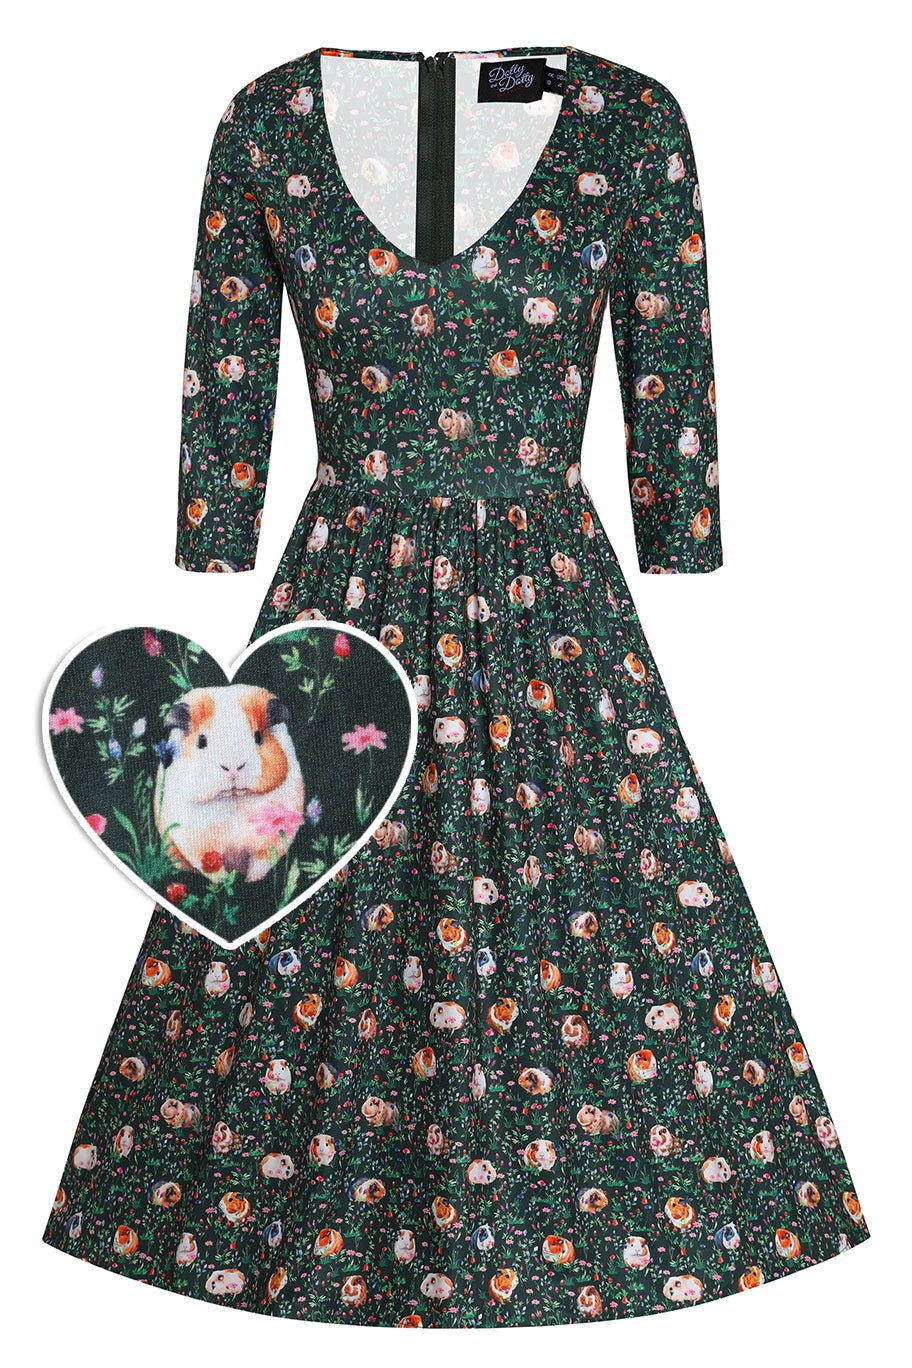 Front View of Guinea Pig Print Dress in Green